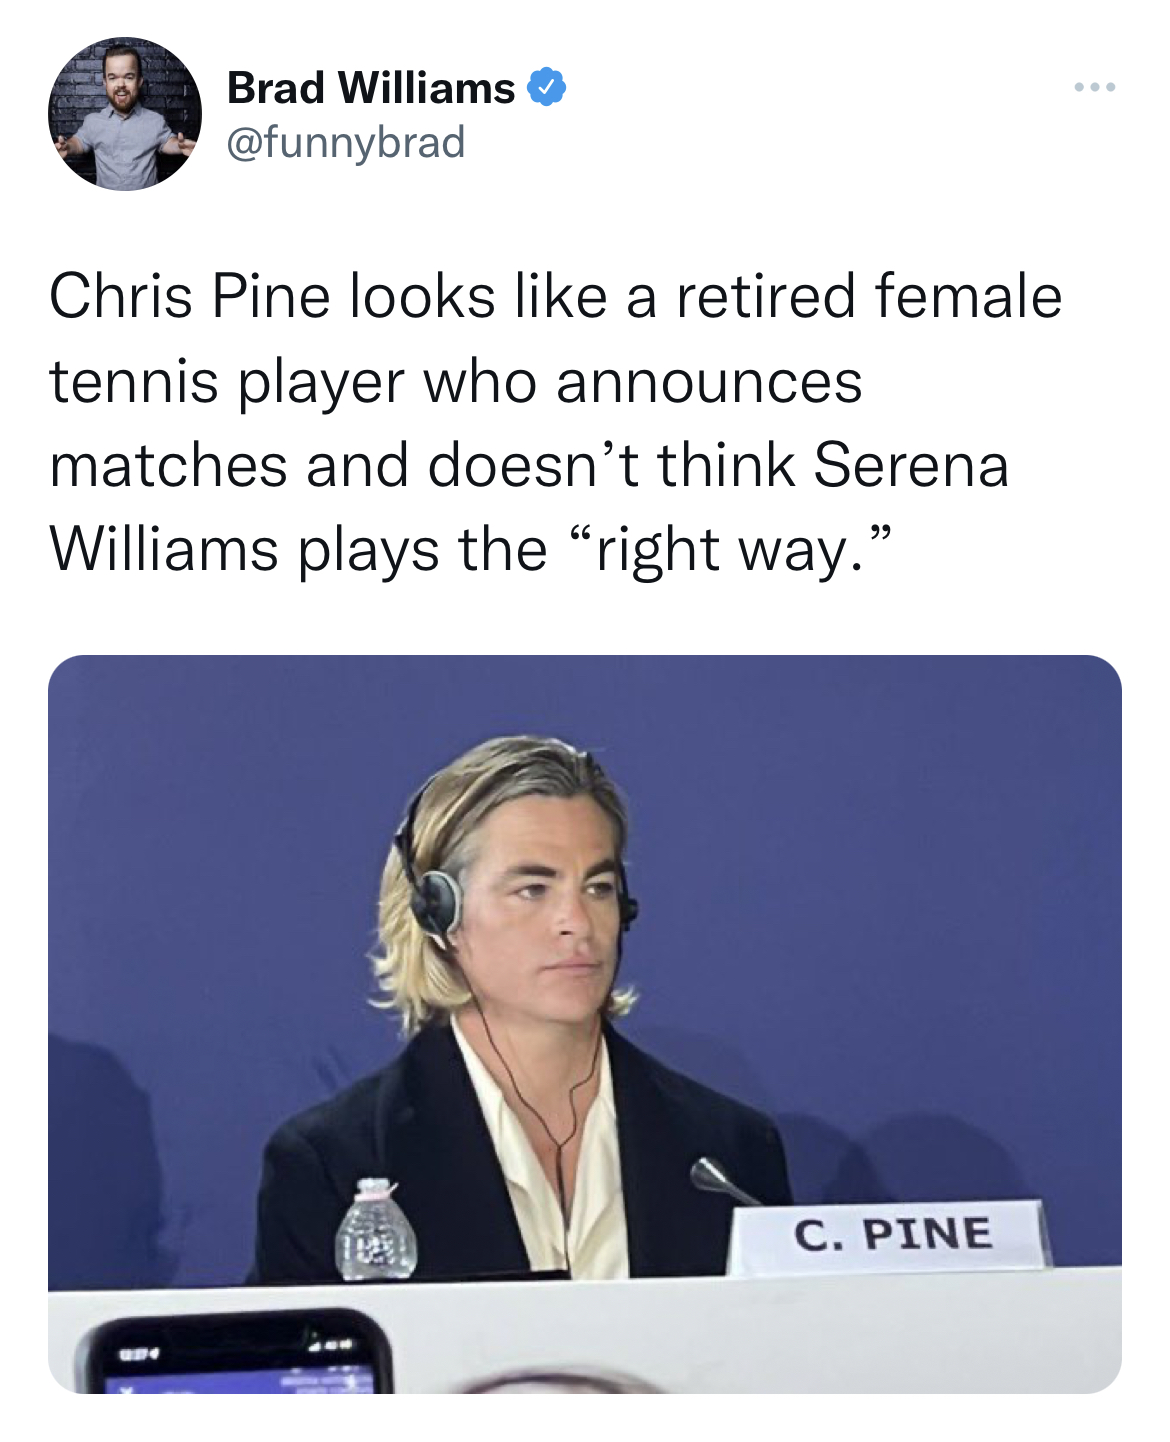 Chris Pine Venice Film Festival Memes - Don't Worry Darling - Brad Williams Chris Pine looks a retired female tennis player who announces matches and doesn't think Serena Williams plays the "right way." C. Pine